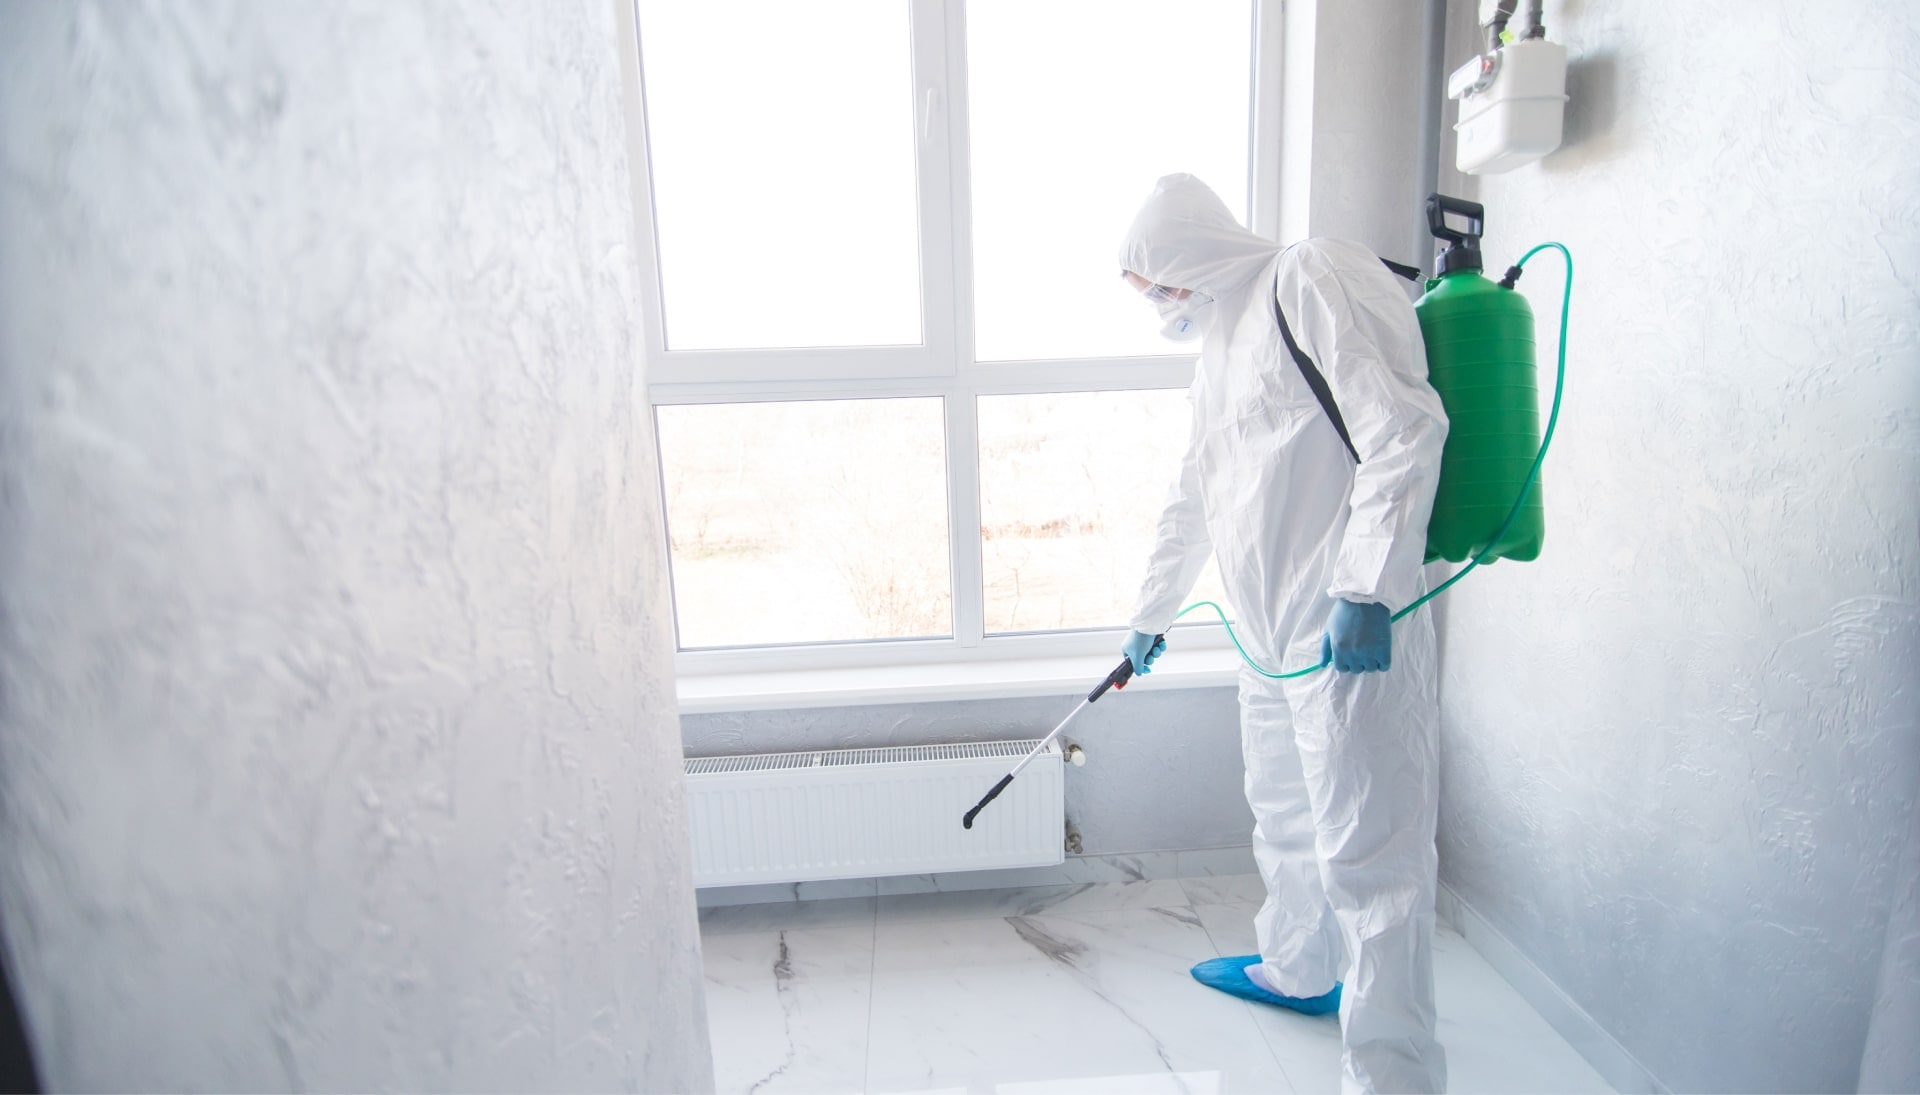 We provide the highest-quality mold inspection, testing, and removal services in the Gilbert, Arizona area.